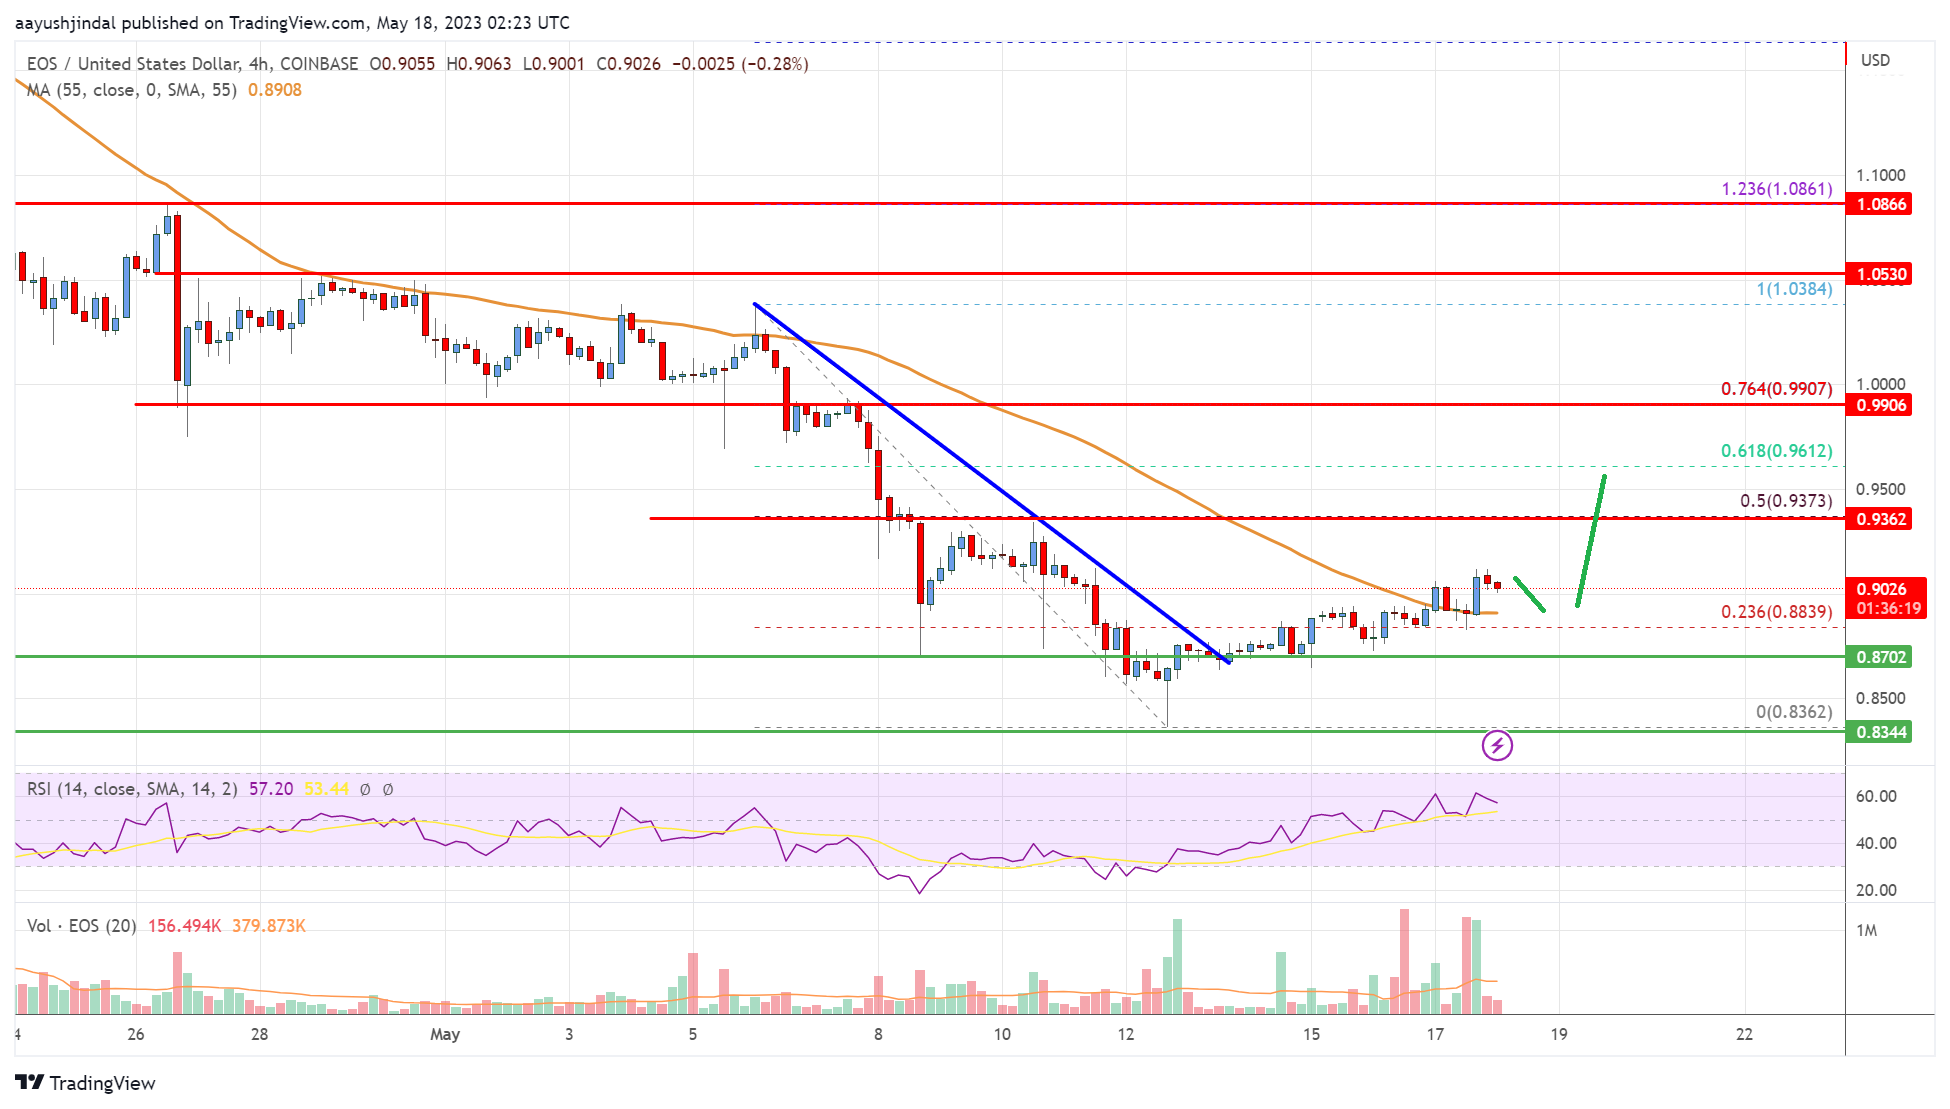 EOS Price Analysis: Signs of Recovery Toward $1.0